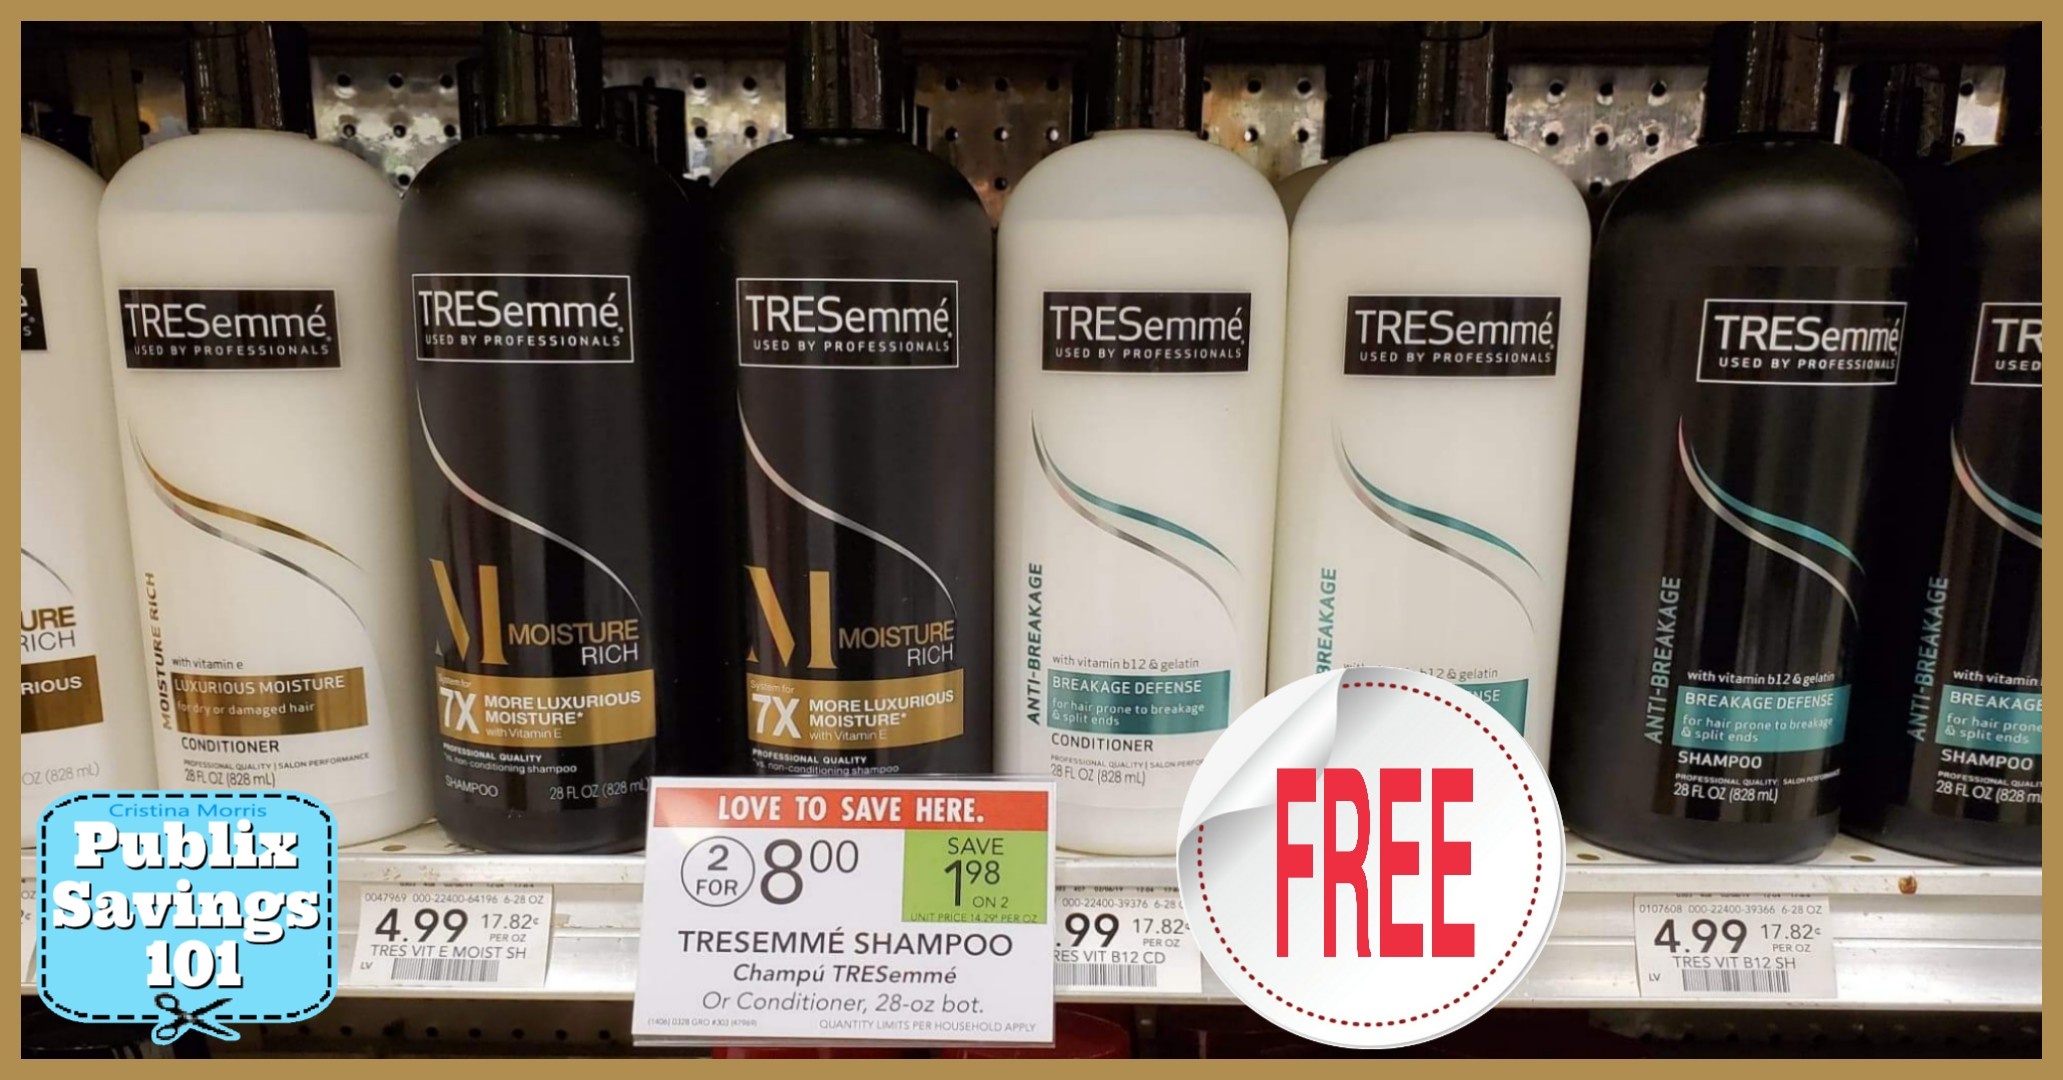 Tresemme Hair Care Products – Free + $1 Moneymaker! | Publix Savings 101 - Free Printable Tresemme Coupons